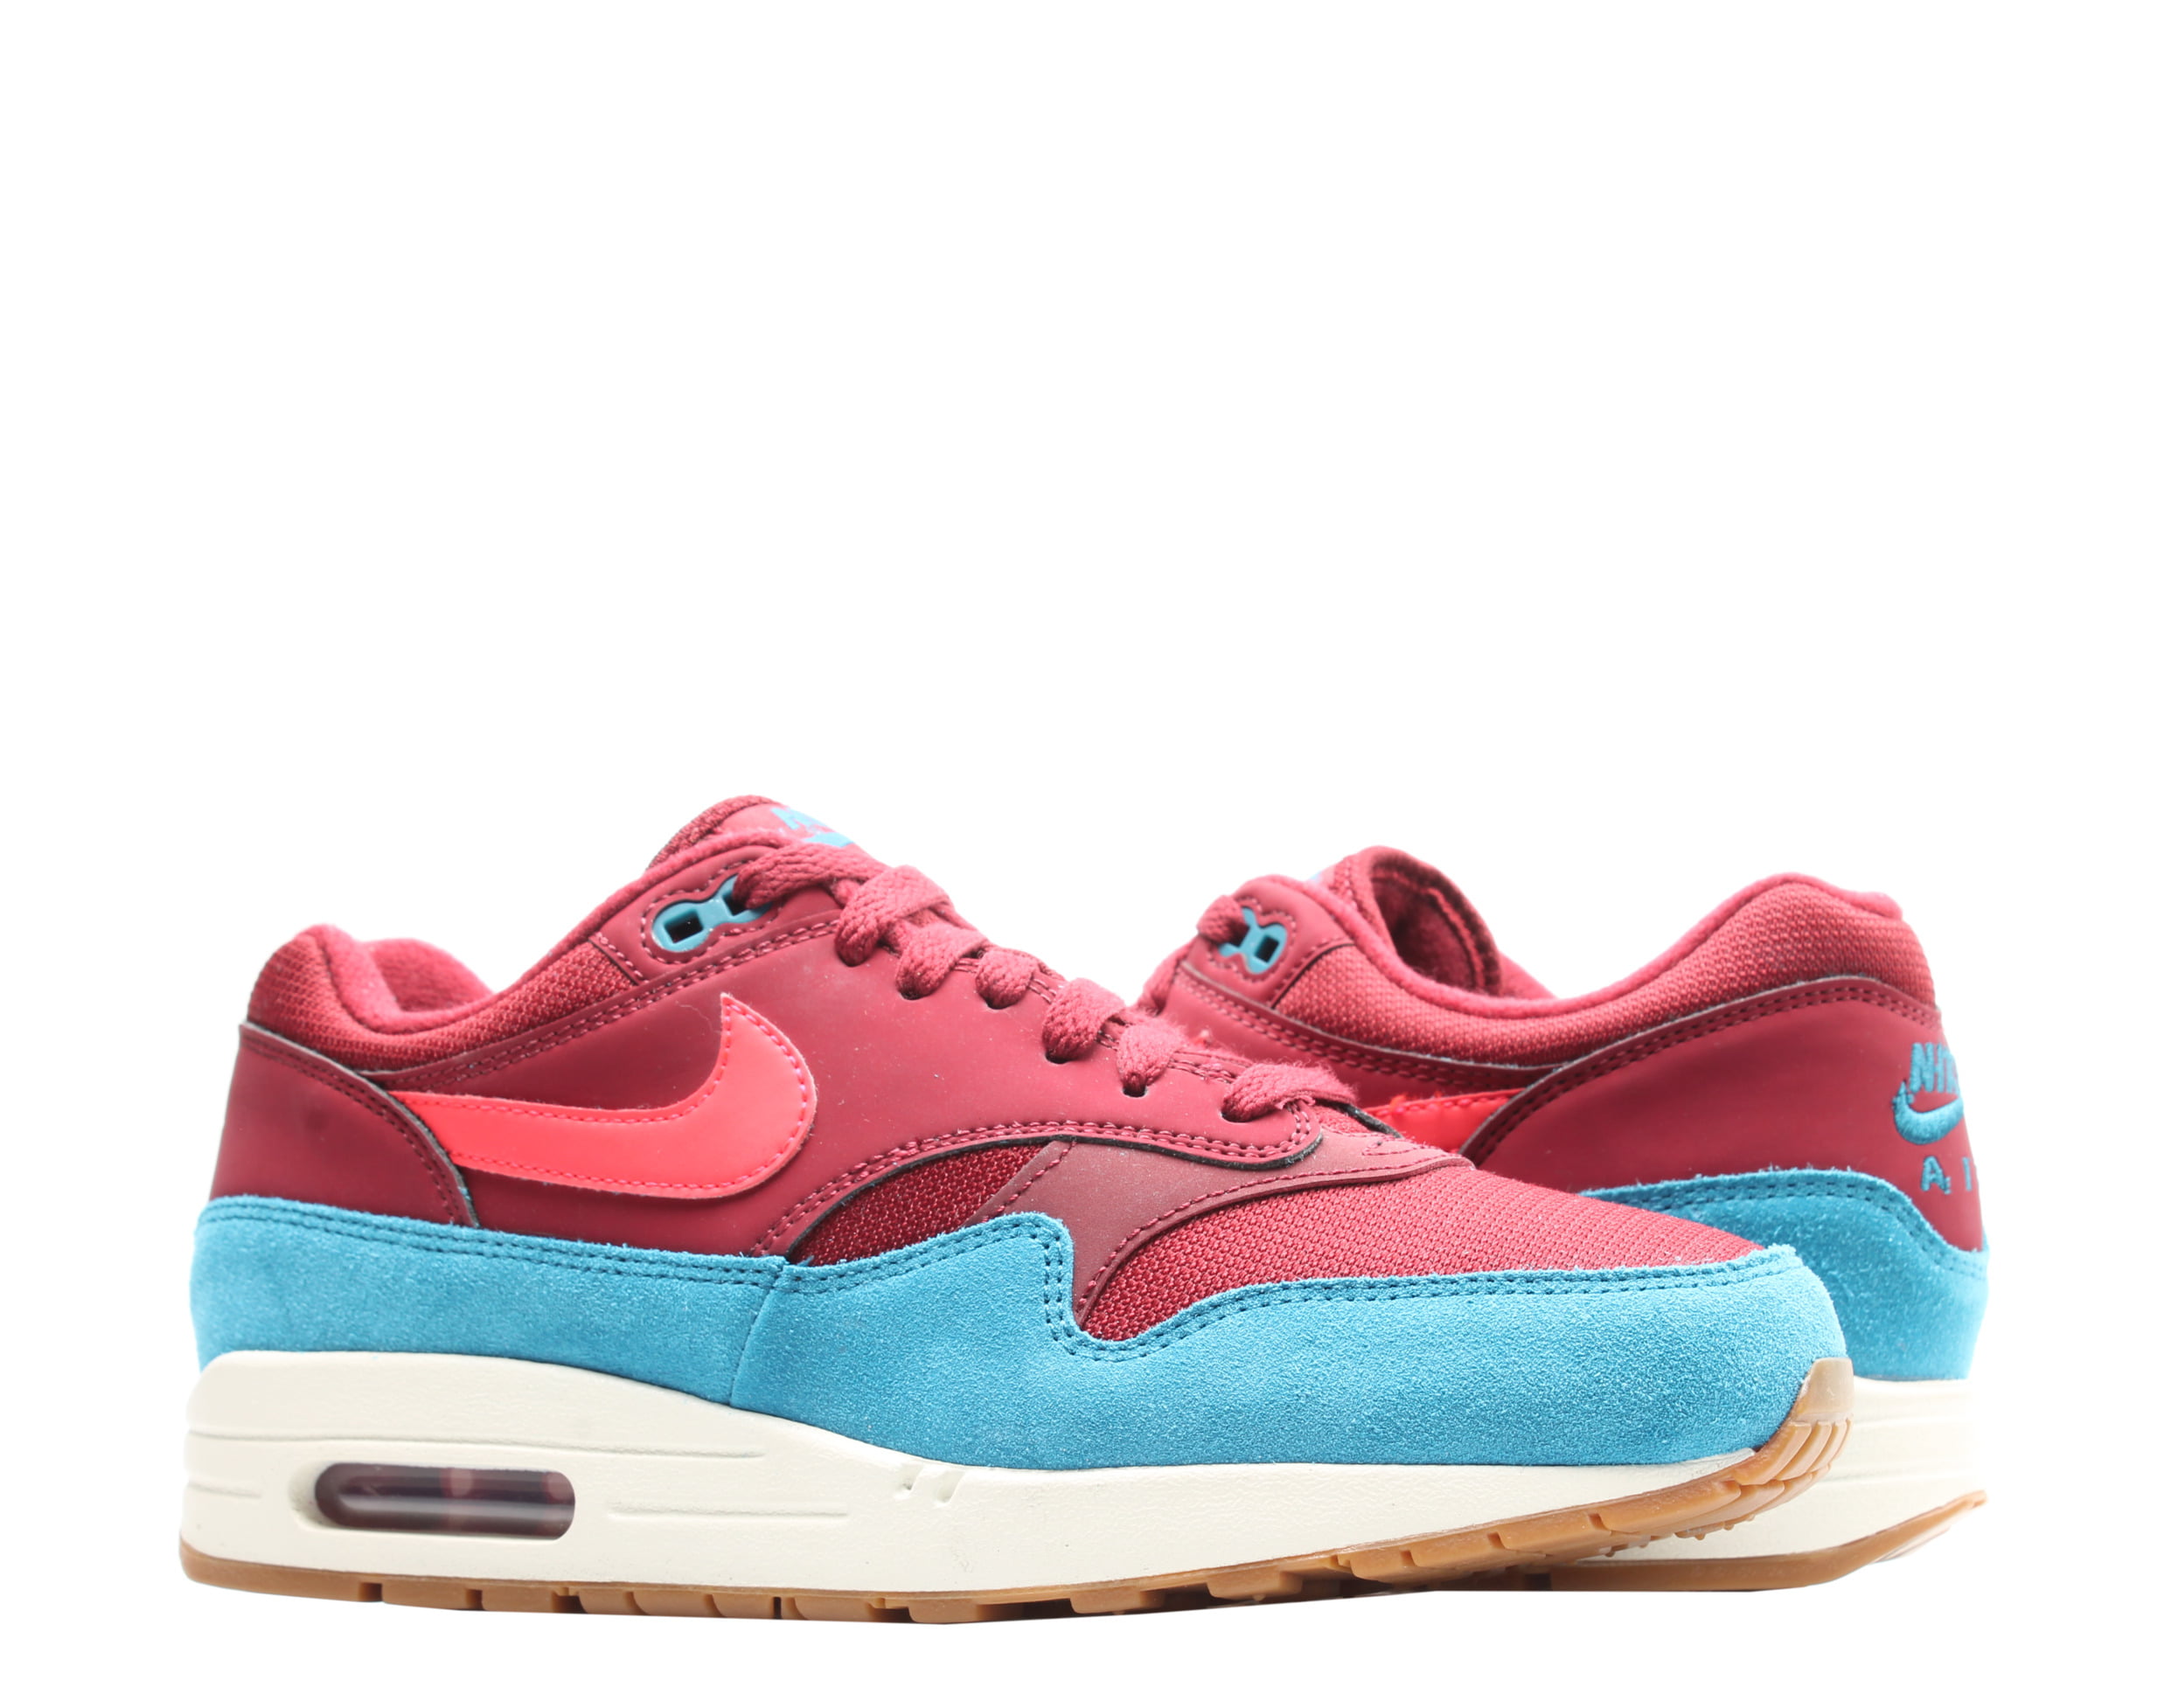 nike air max 1 team red green abyss